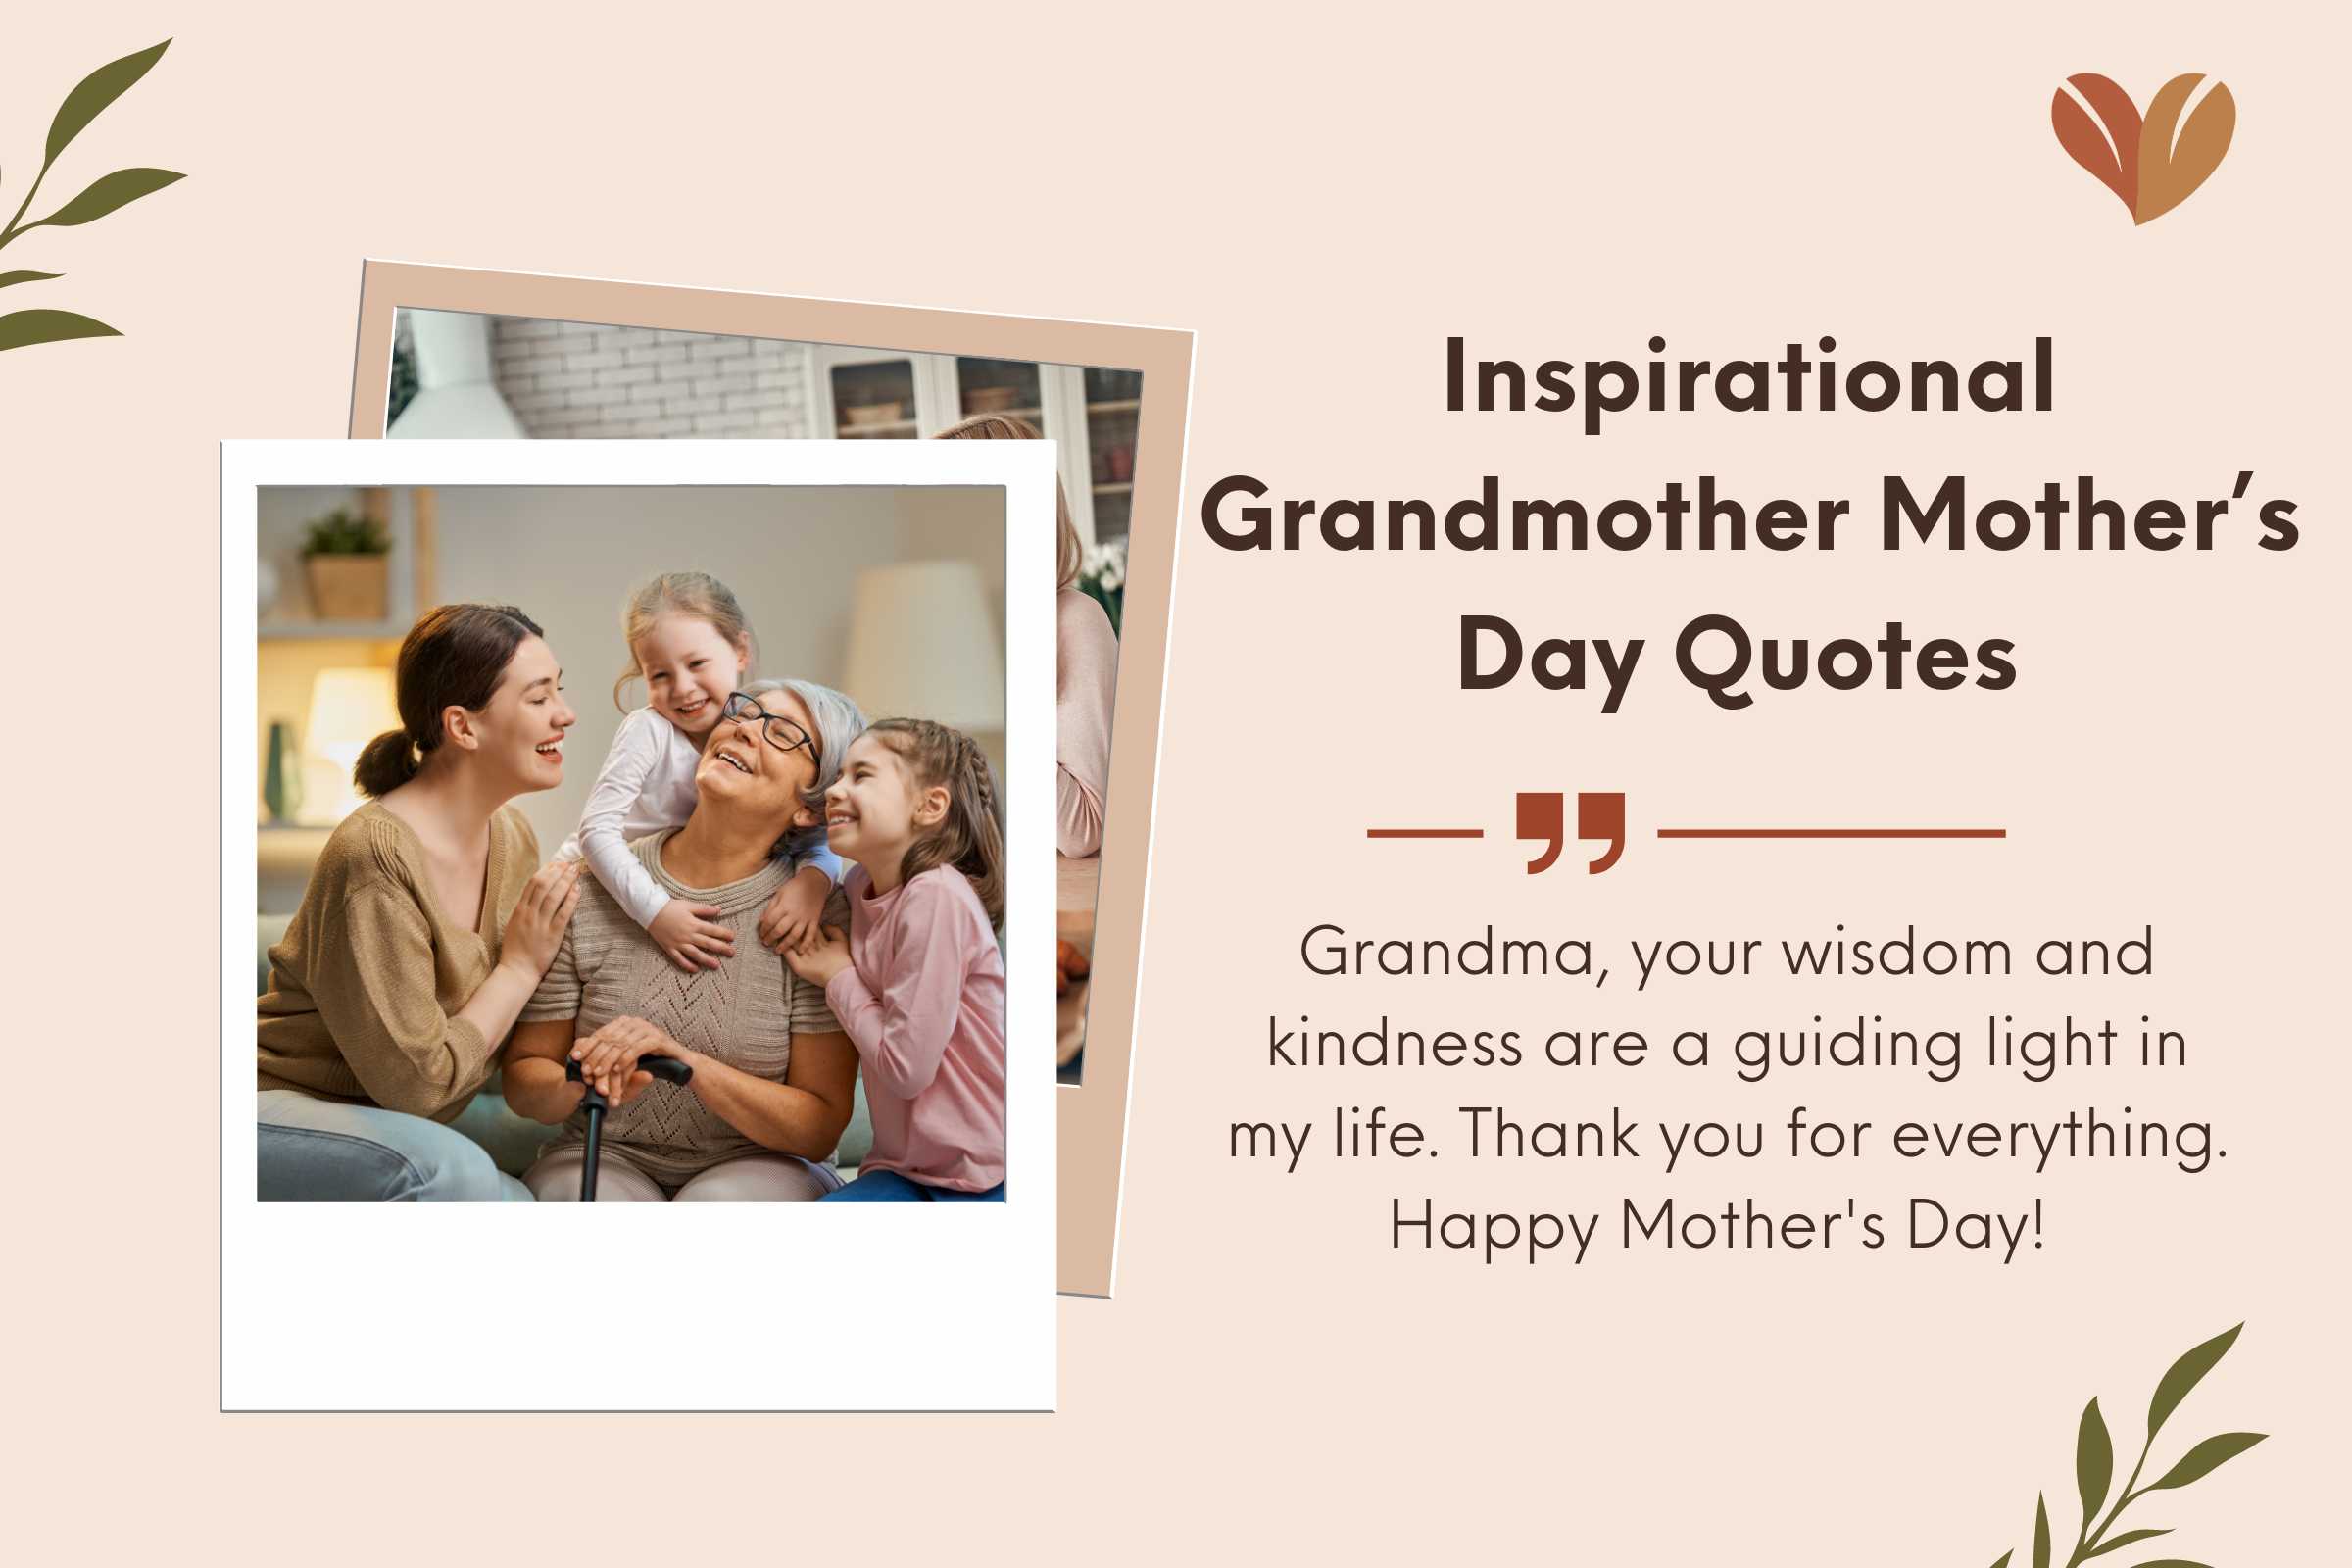 Inspirational Grandmother Mother's Day Quotes 